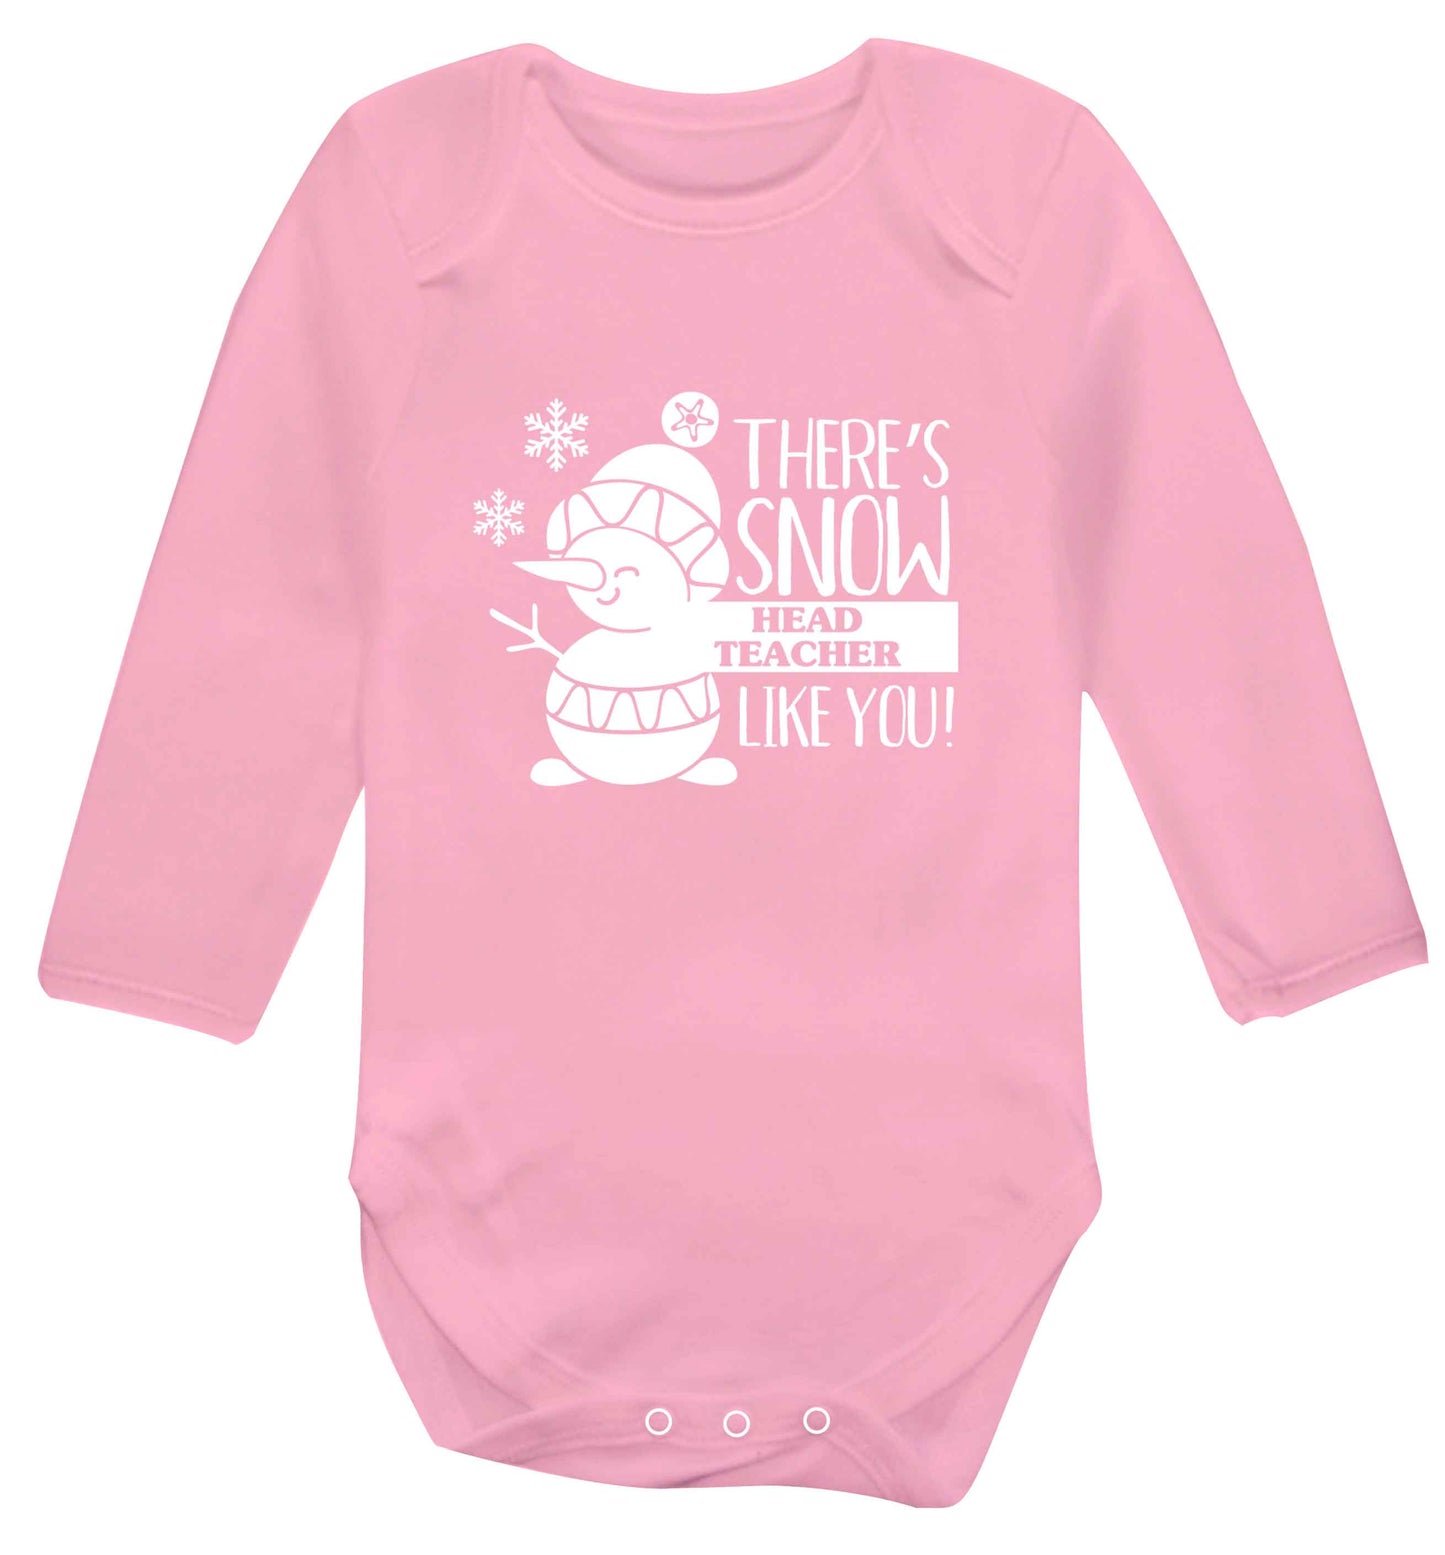 There's snow head teacher like you baby vest long sleeved pale pink 6-12 months